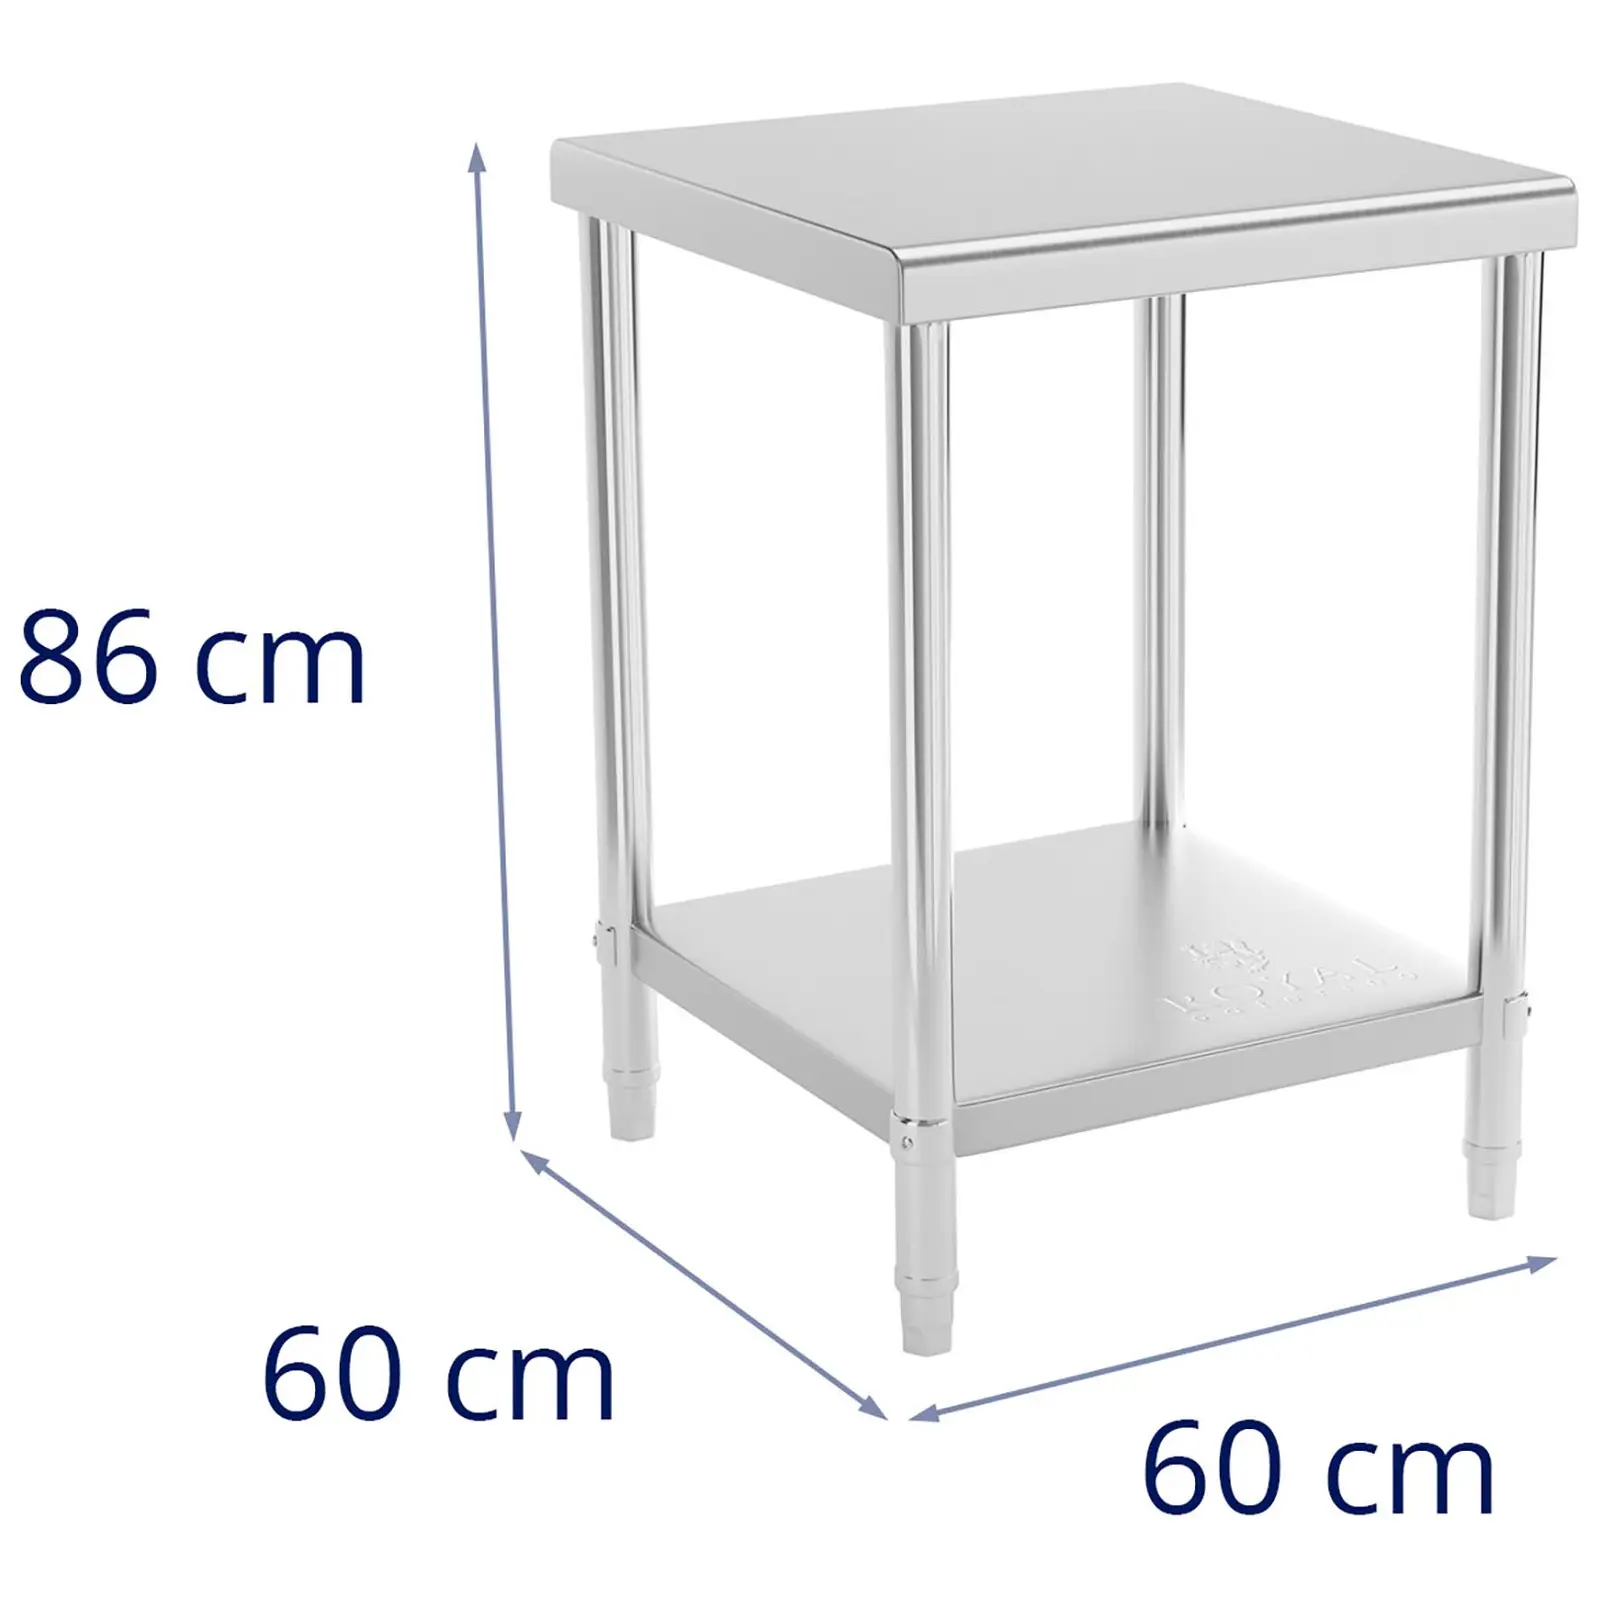 Stainless Steel Work Table - 60 x 60 cm - 150 kg load capacity